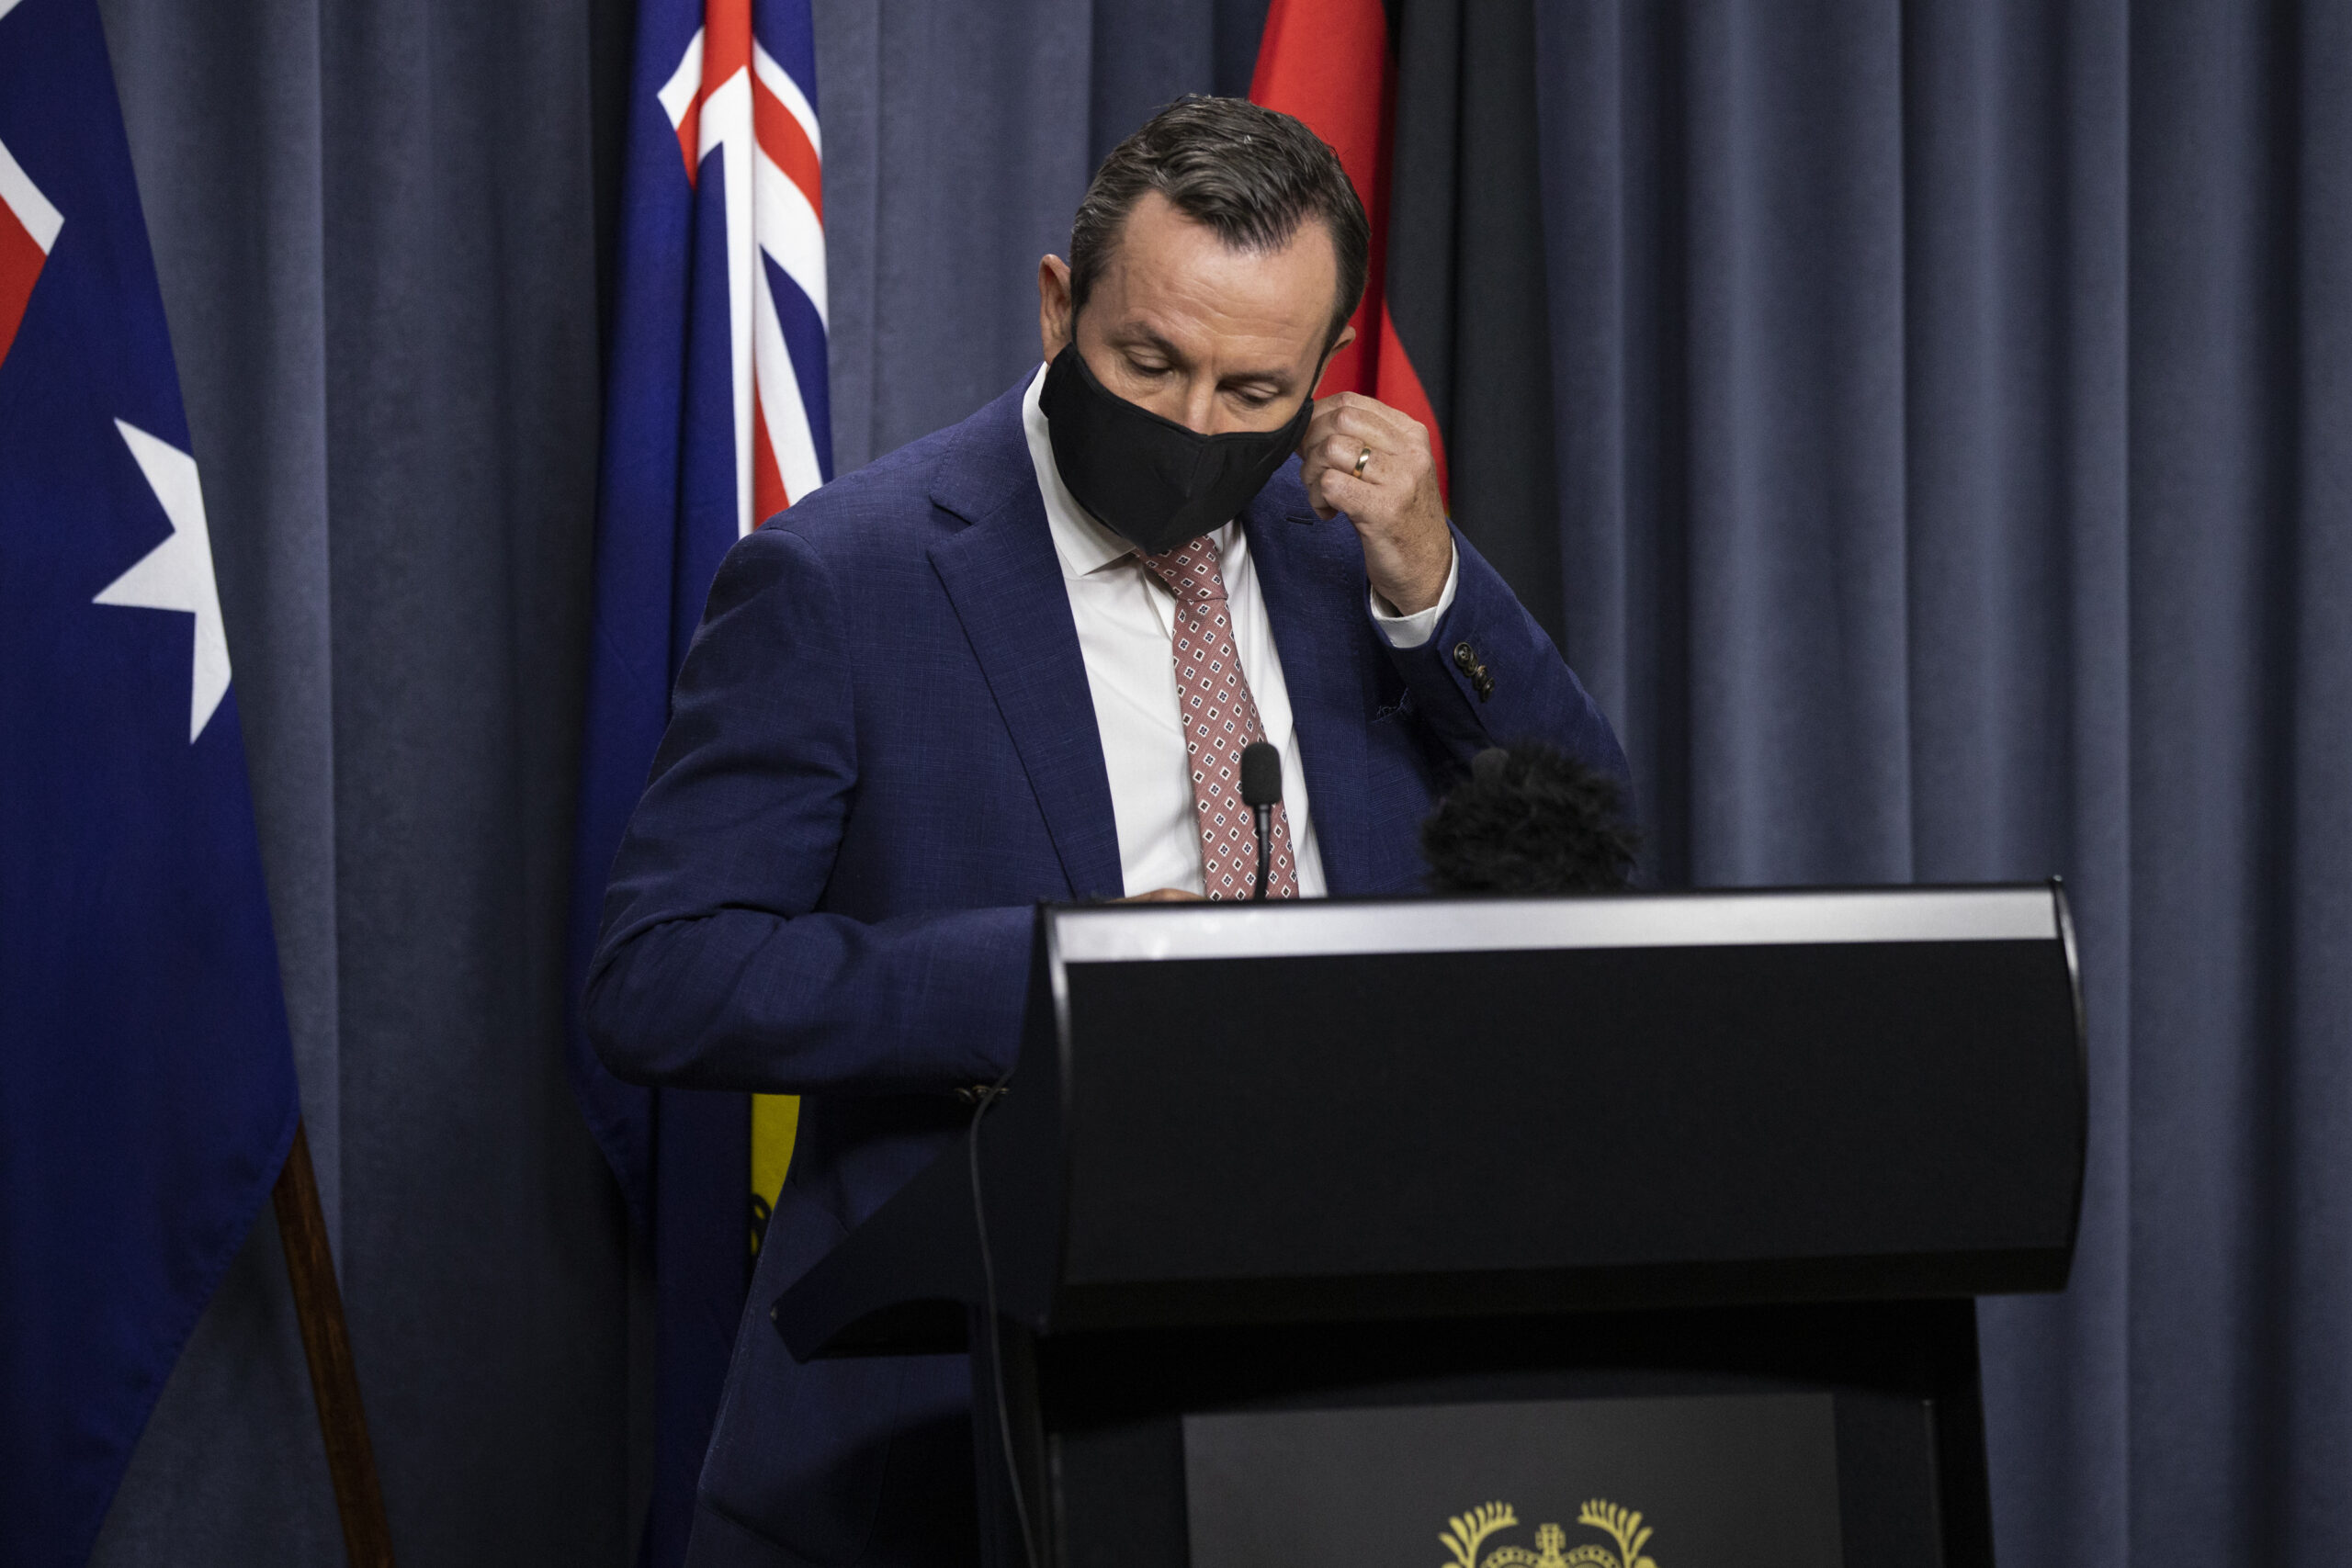 PERTH, AUSTRALIA - JANUARY 31: Premier Mark McGowan arrives wearing a mandatory face mask to Dumas House Press Room on January 31, 2021 in Perth, Australia. Premier Mark McGowan has announced a five day lockdown across the Perth, Peel and South West regions of Western Australia, effective from 6pm local time on Sunday 21 January. The lockdown measures come following the discovery of a positive COVID-19 case in a worker at a quarantine hotel. (Photo by Matt Jelonek/Getty Images)